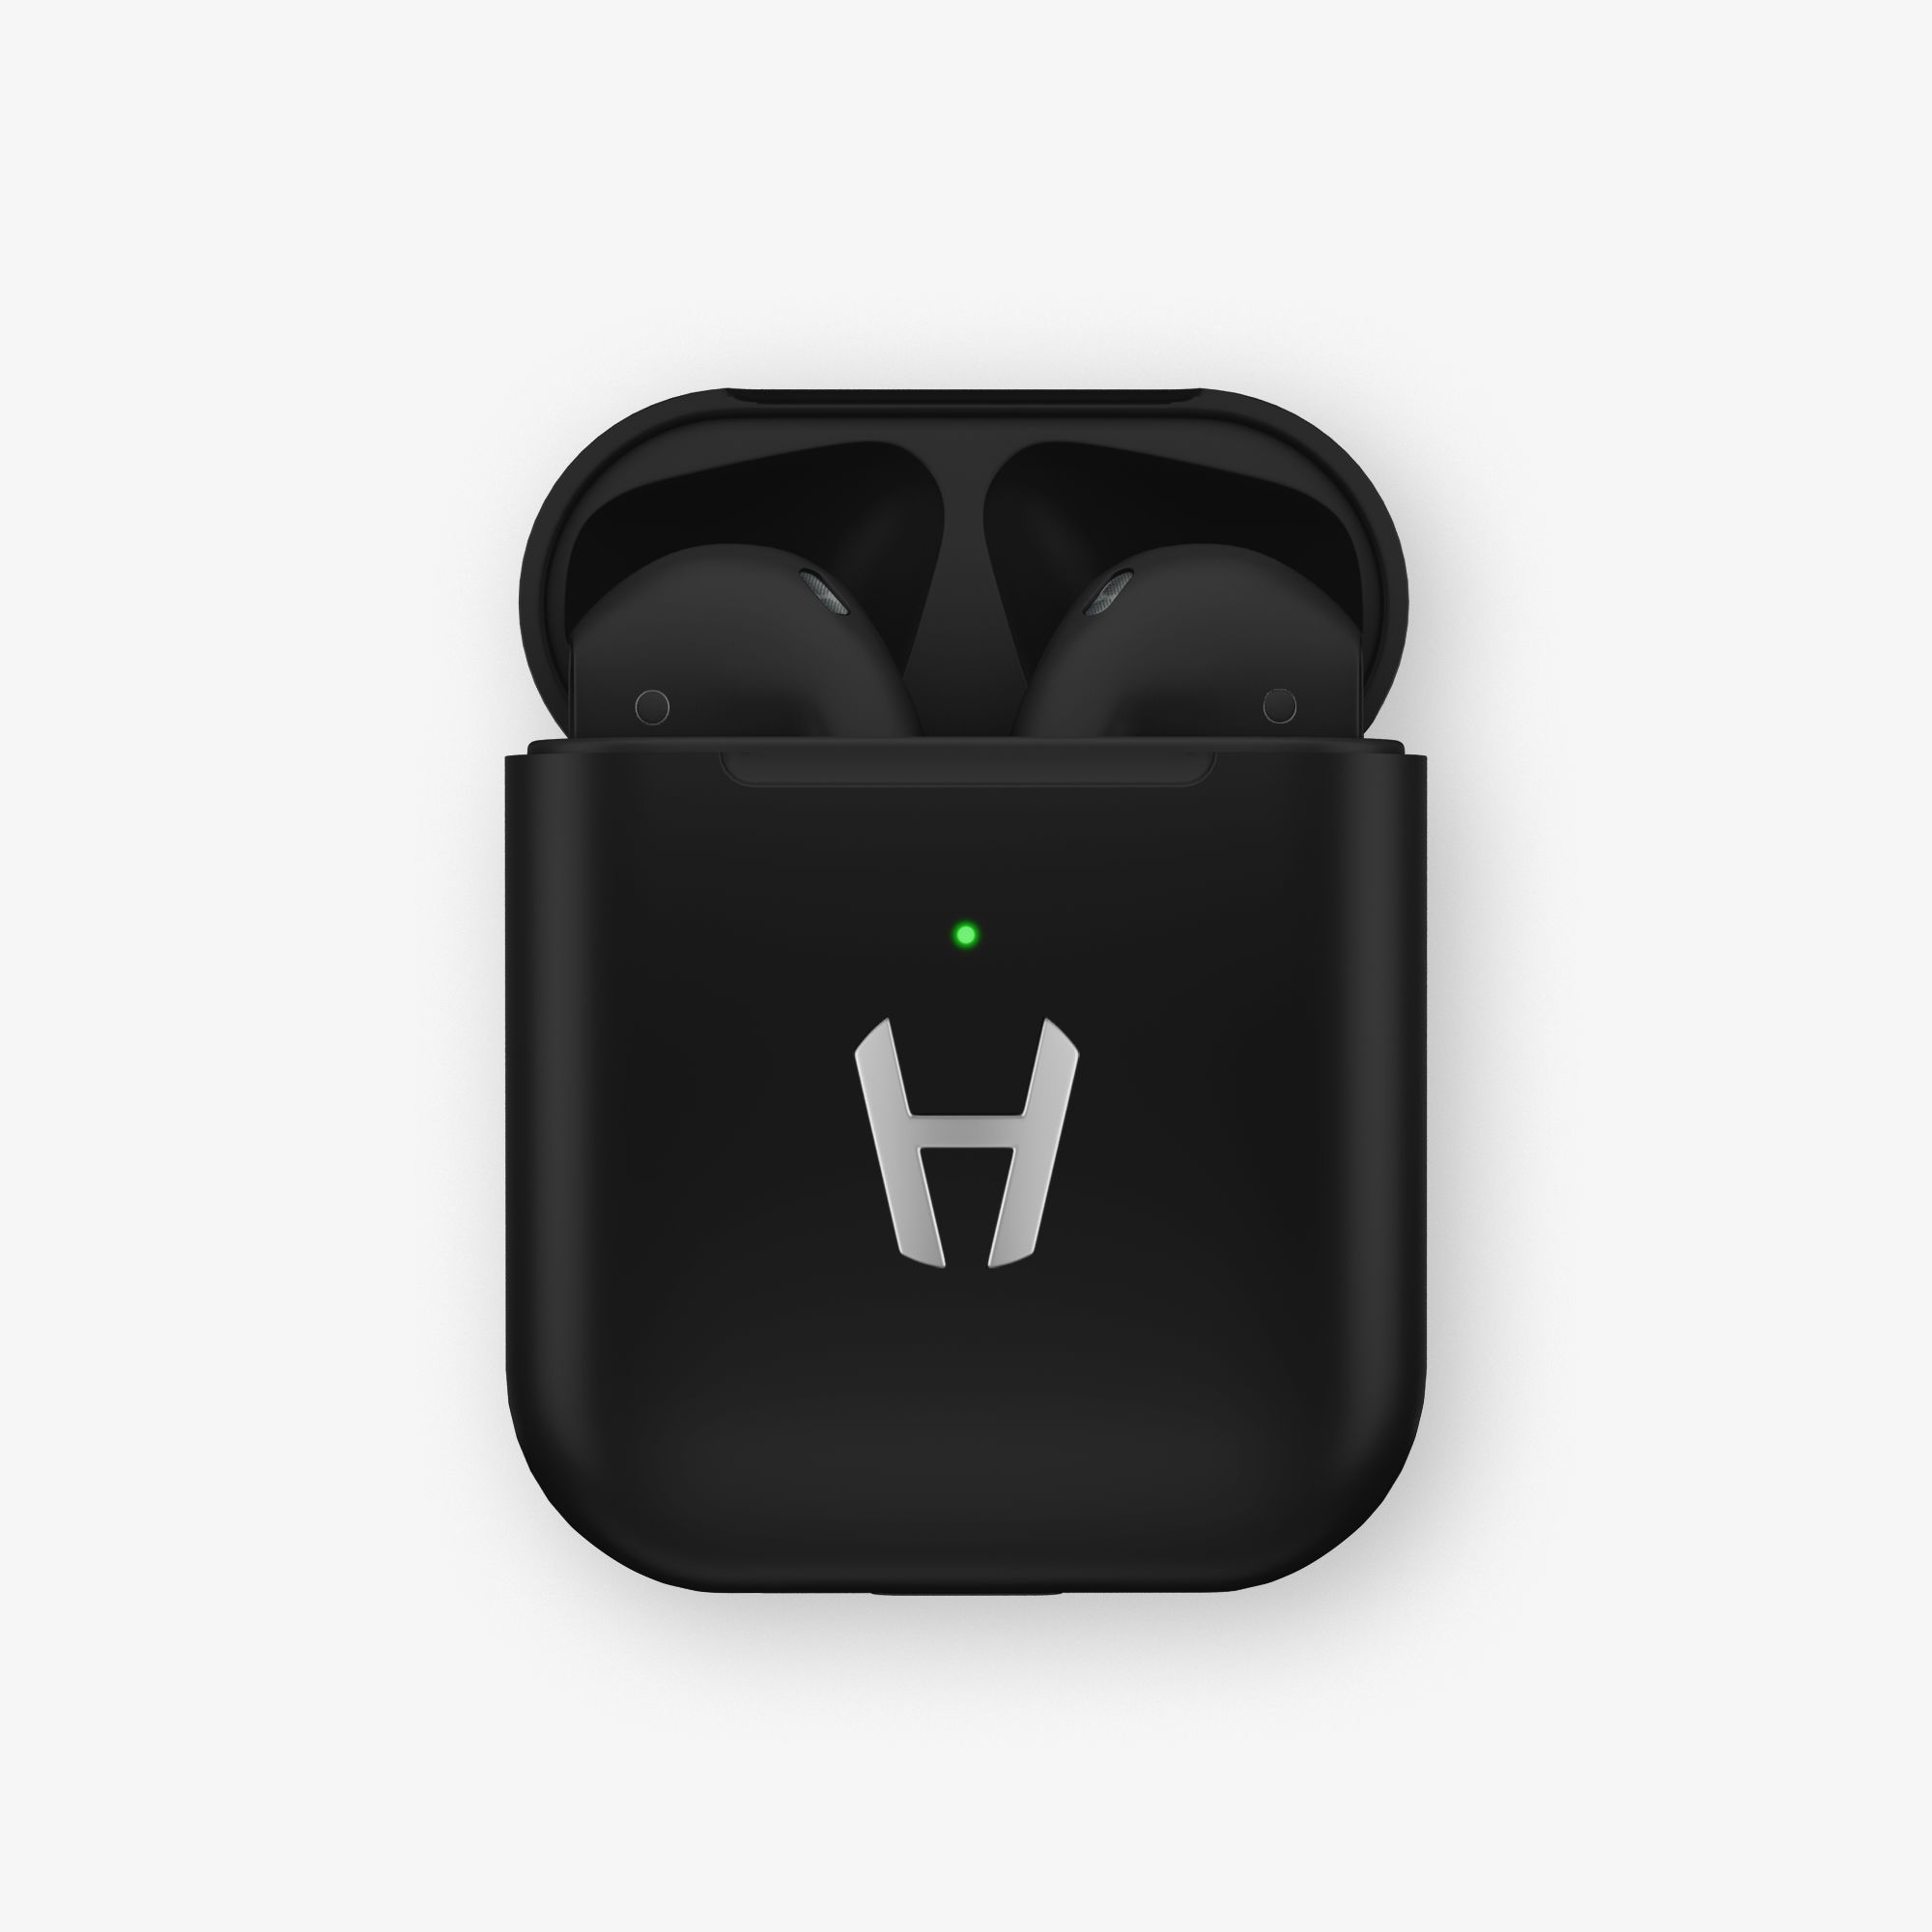 Hadoro AirPods Cherry with Wireless Charging Case | Black - Stainless Steel